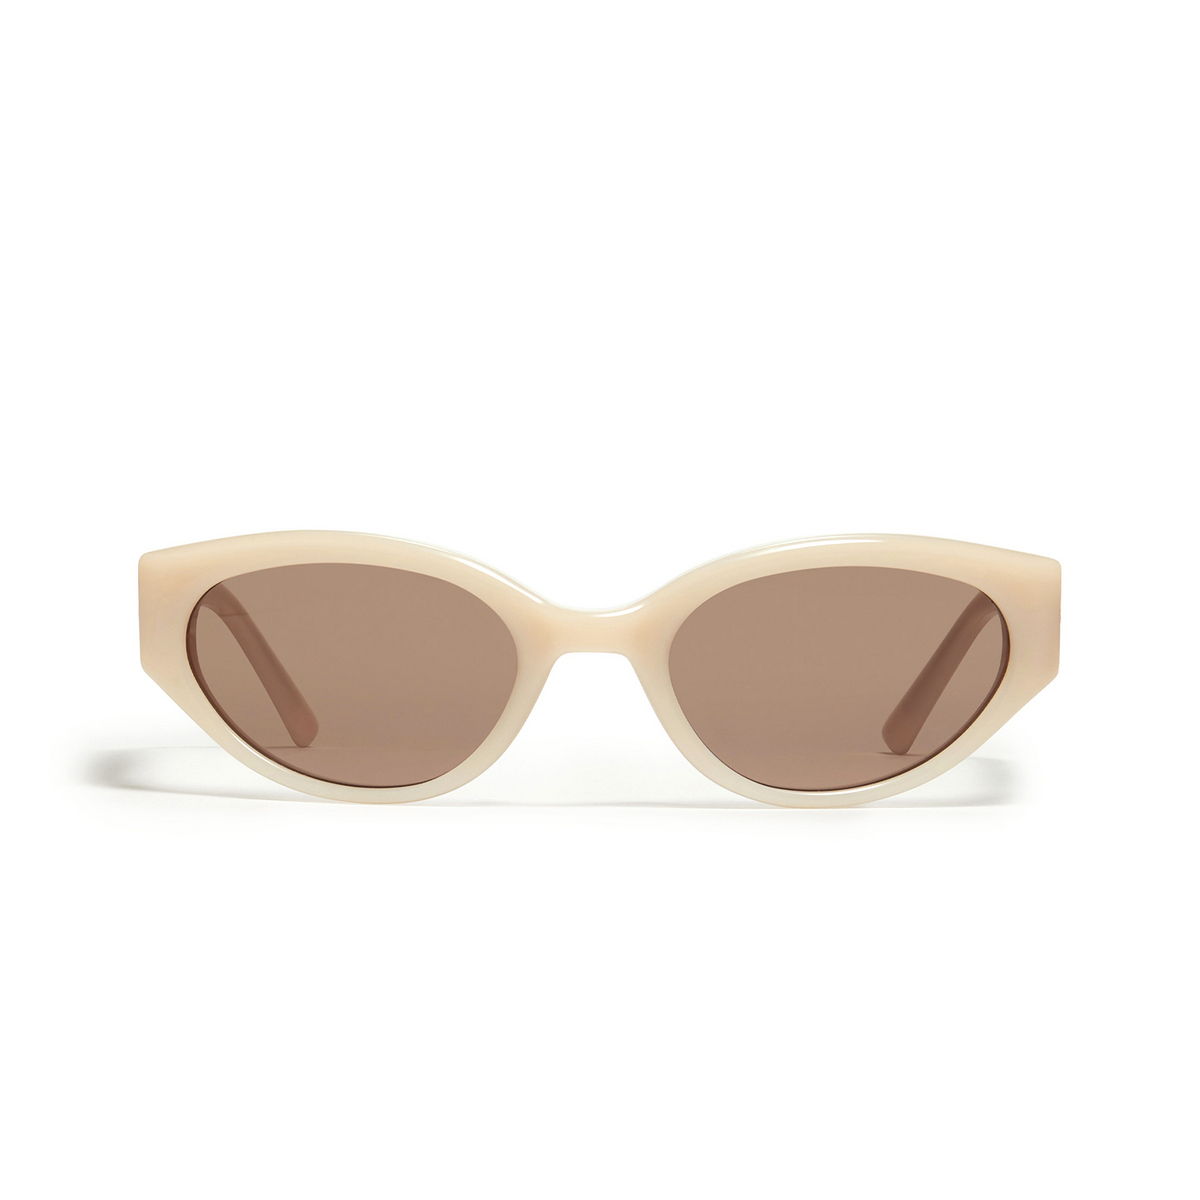 Gentle Monster® Cat-eye Sunglasses: Molto color Ivory IV1 - front view.